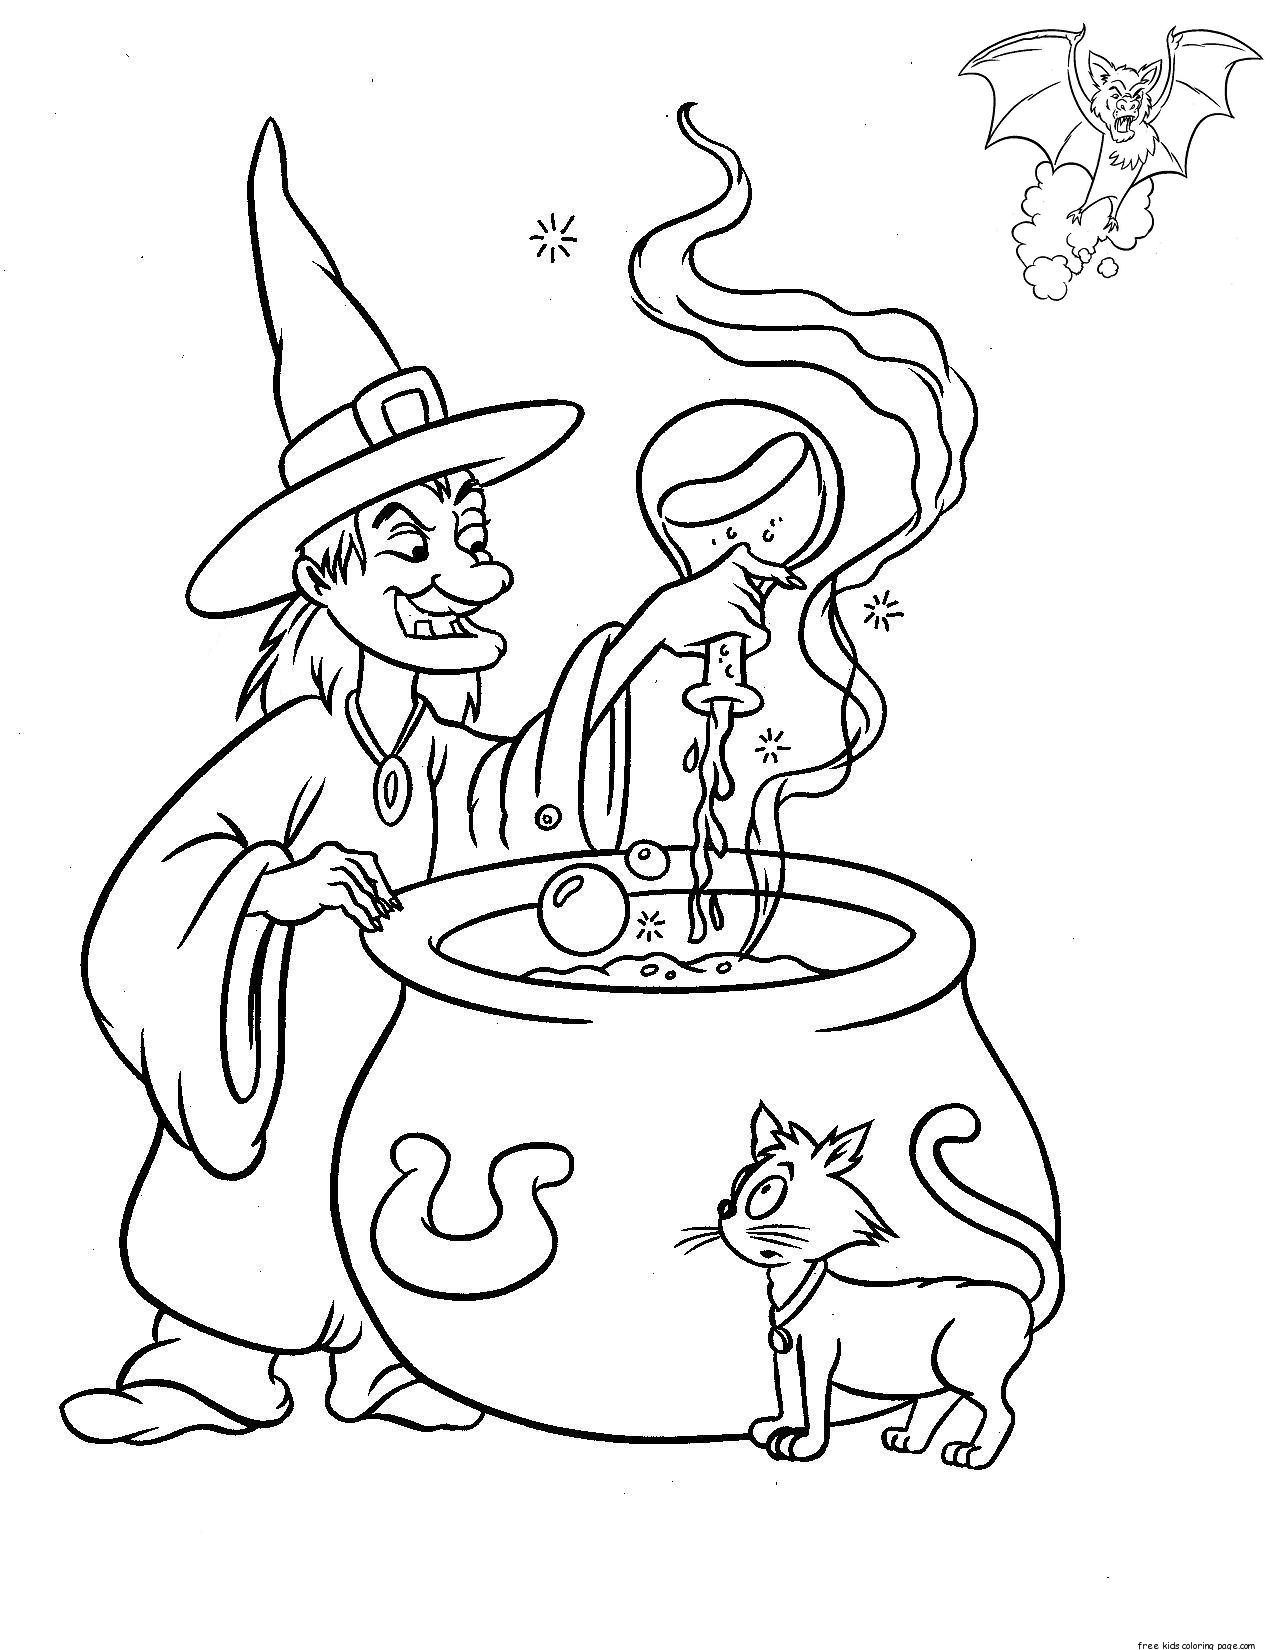 Halloween witches make magic drink